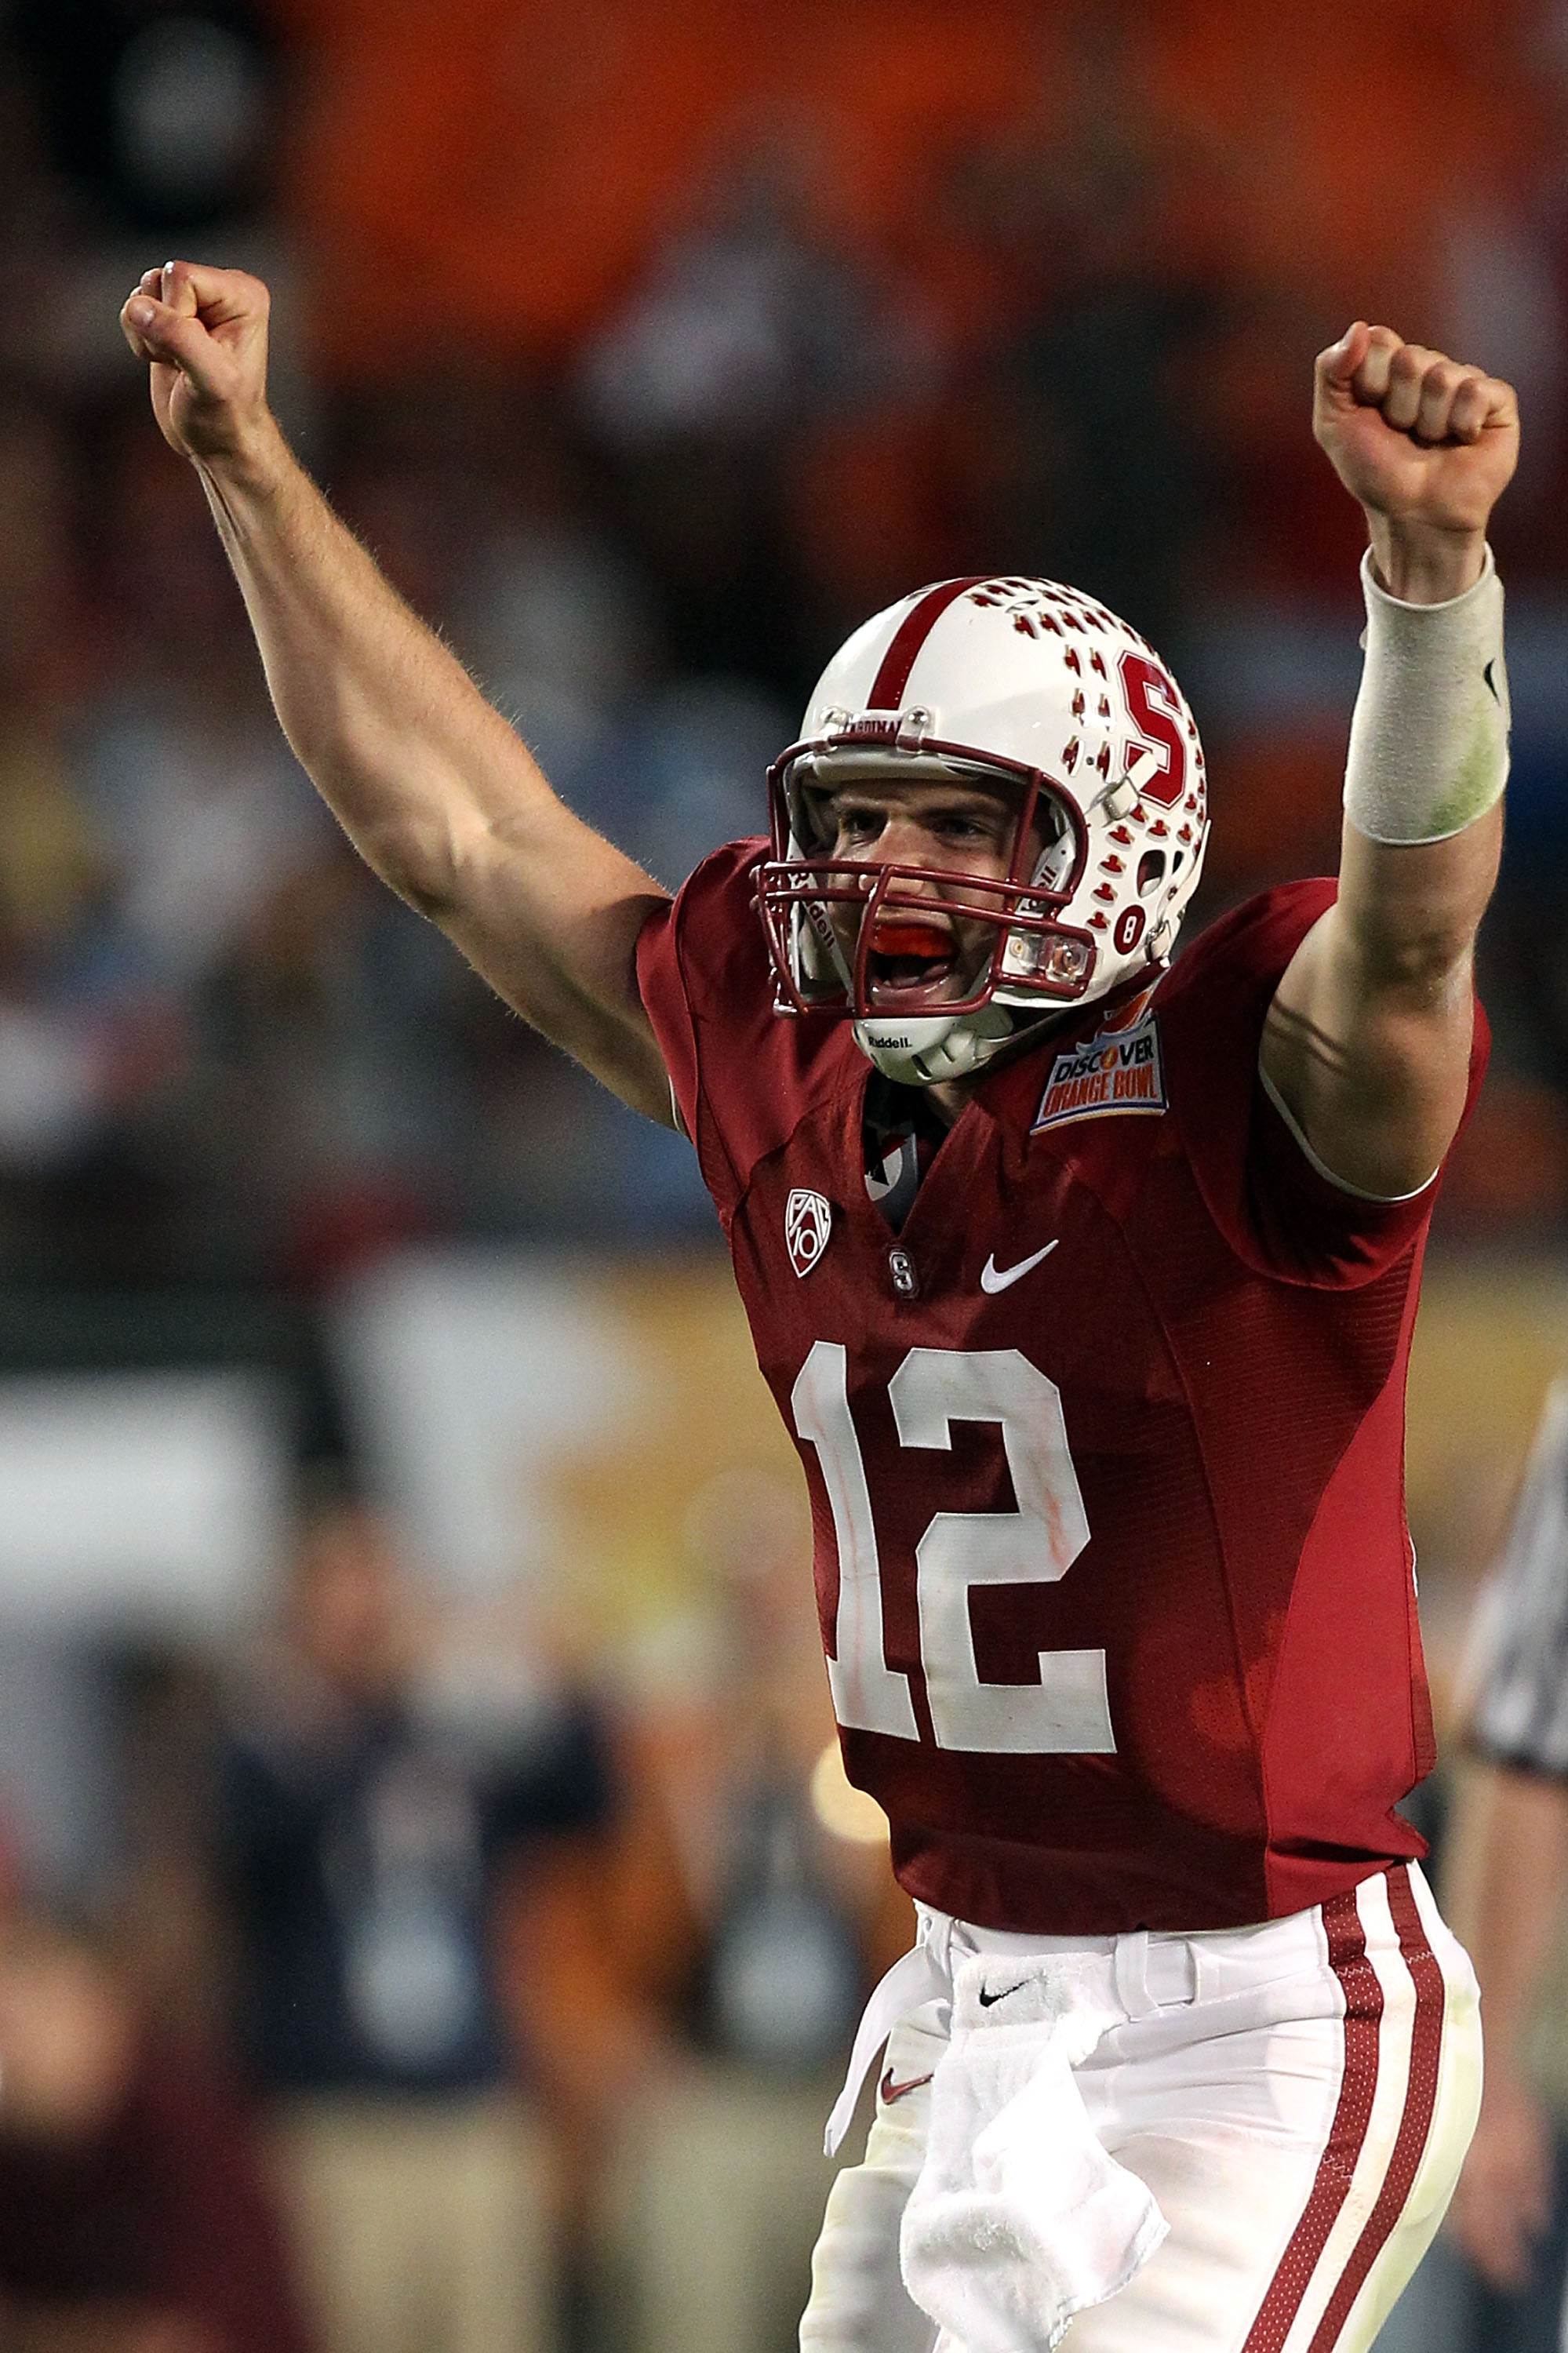 Stanford QB Andrew Luck